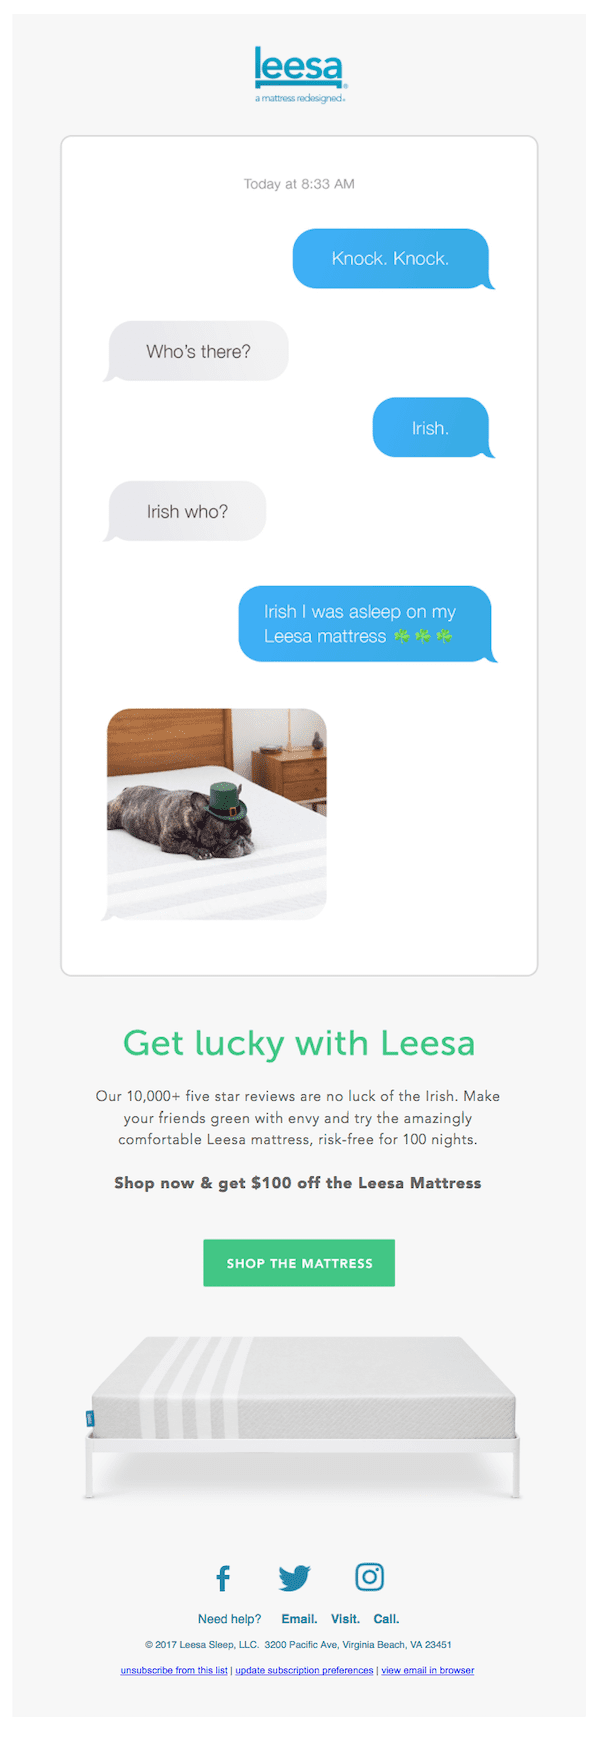 leesa st. paddys day email campaign